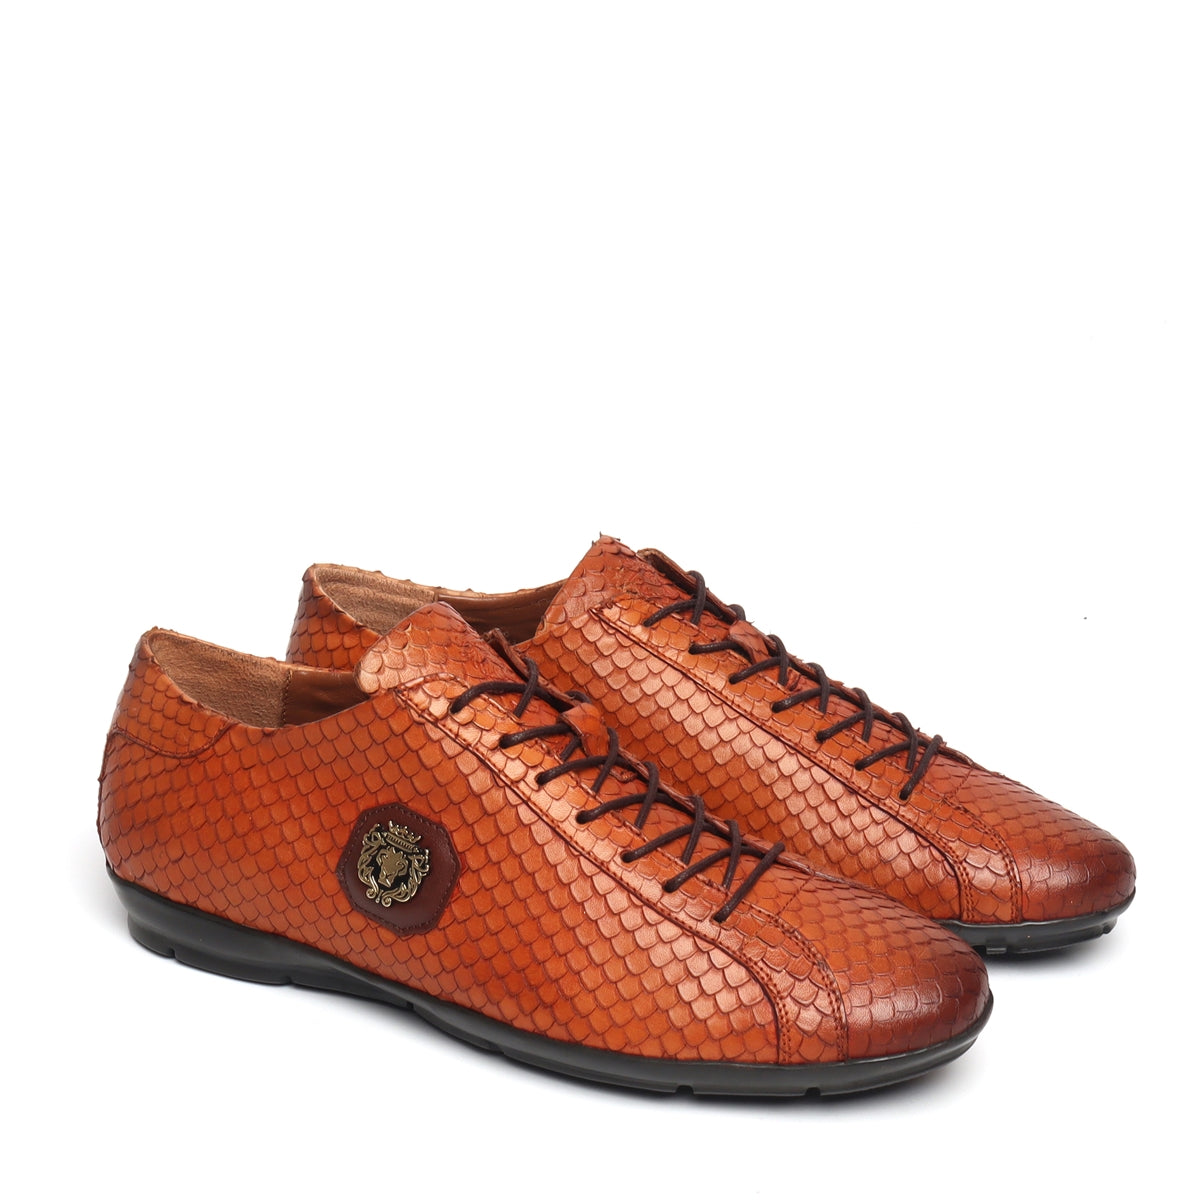 Snake Skin Textured Genuine leather with light weight sneaker by Brune & Bareskin